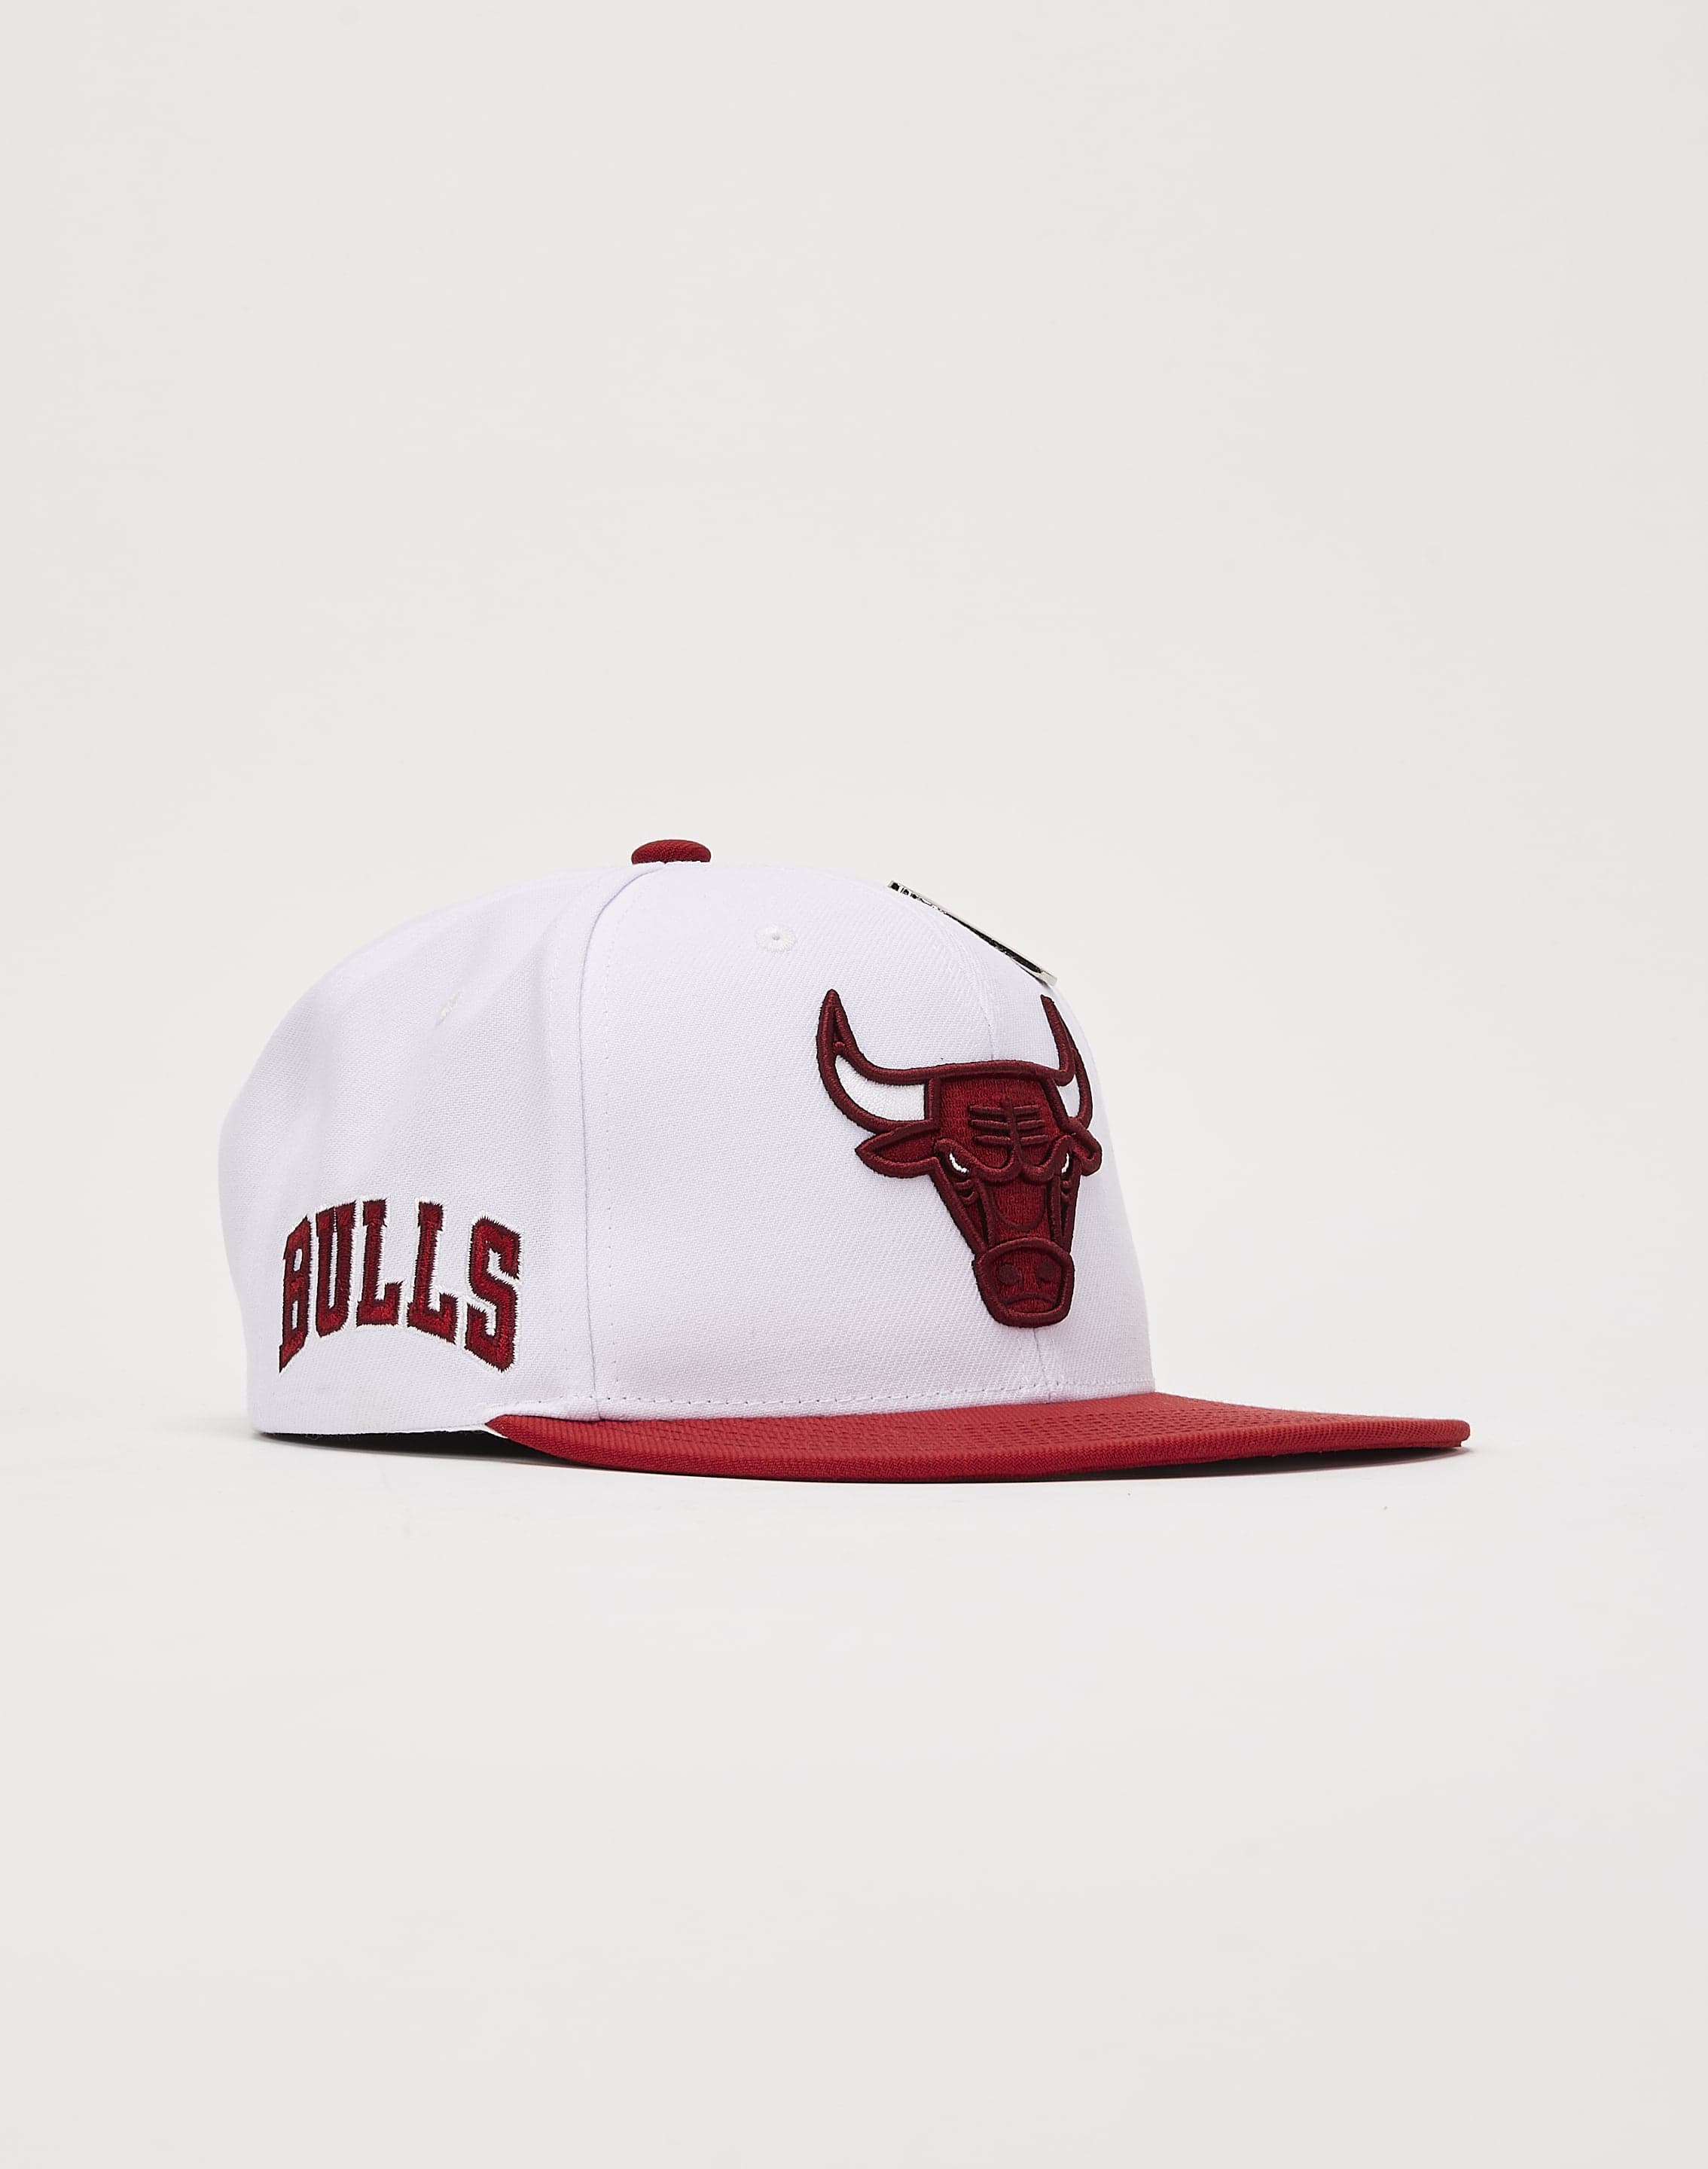 Shop Mitchell & Ness Chicago Bulls Timeline Fitted Hat 6HSFSH21033-CBUBLCK  black